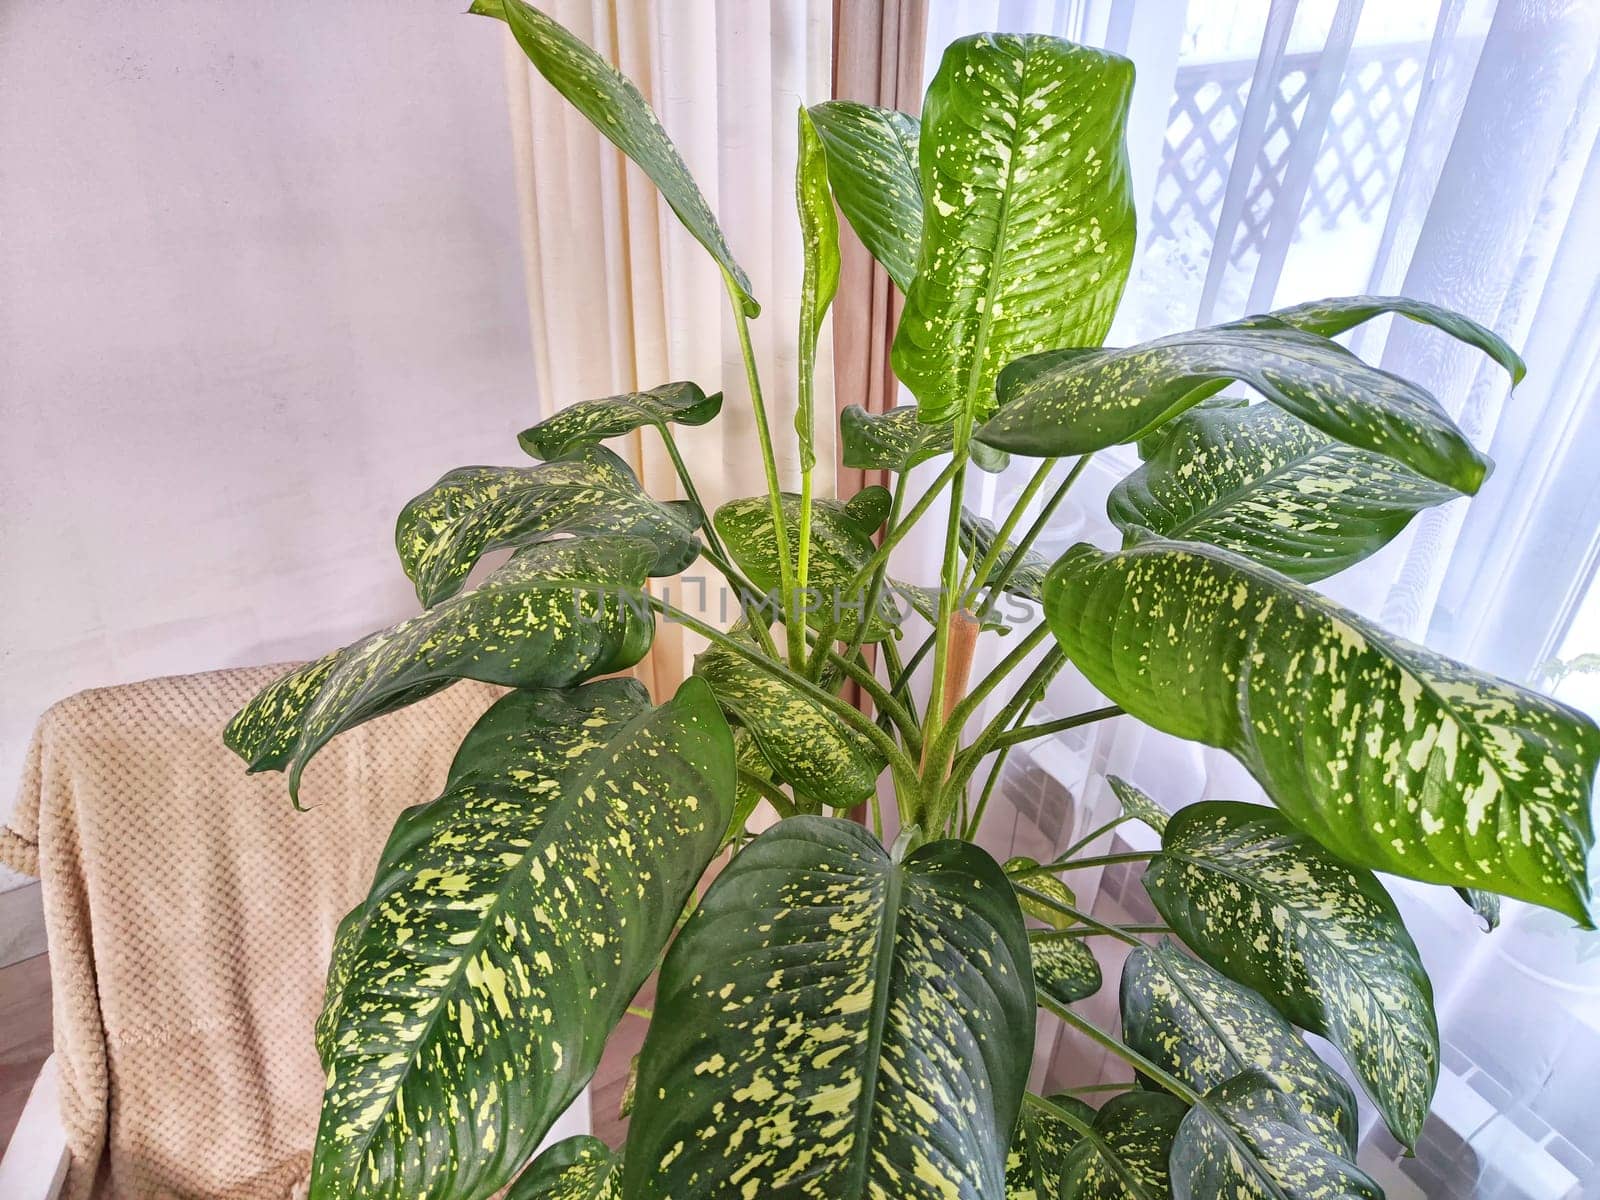 Dieffenbachia plant in a pot by the window with curtains. Interior in light colors. Background with a plant with green leaves and fabric by keleny